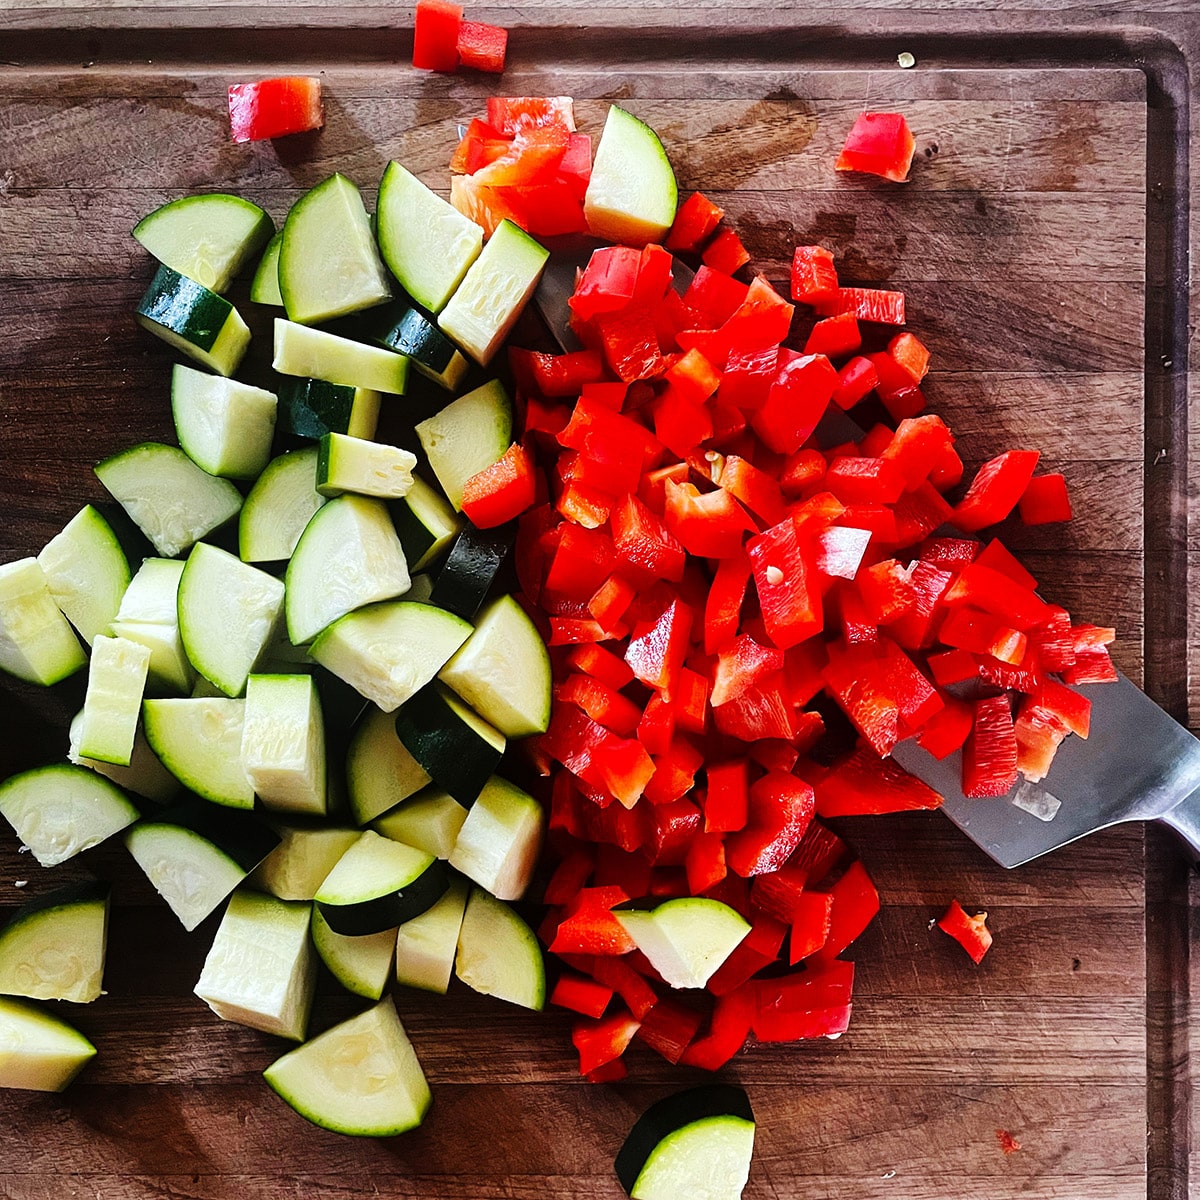 Chopped zucchini and red bell pepper on a wood cutting board.